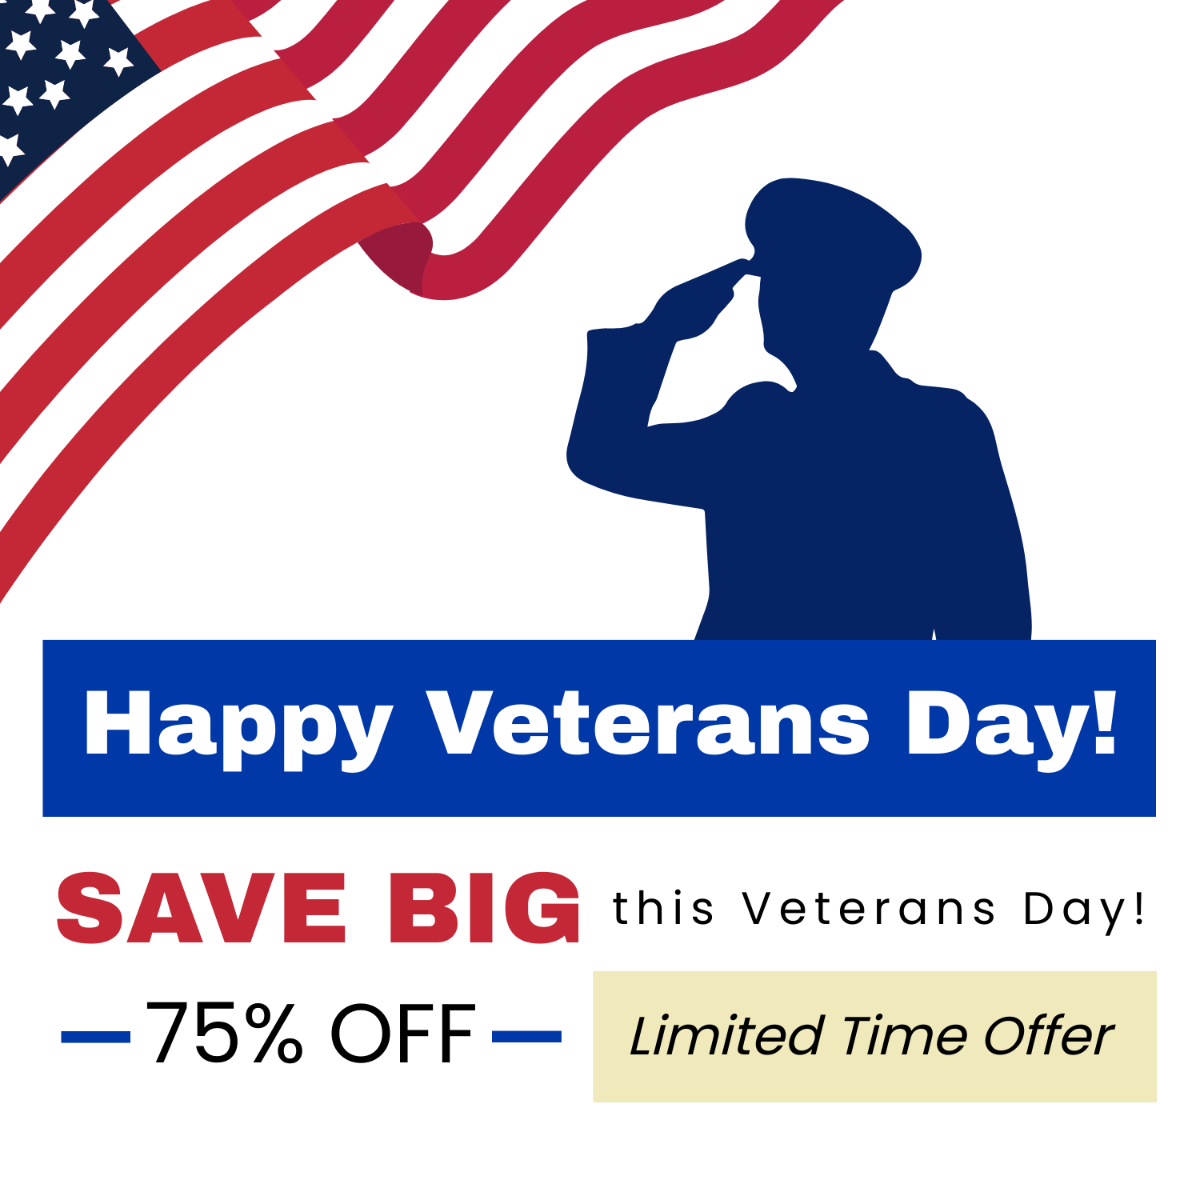 Free Veterans Day Promotion Vector Template